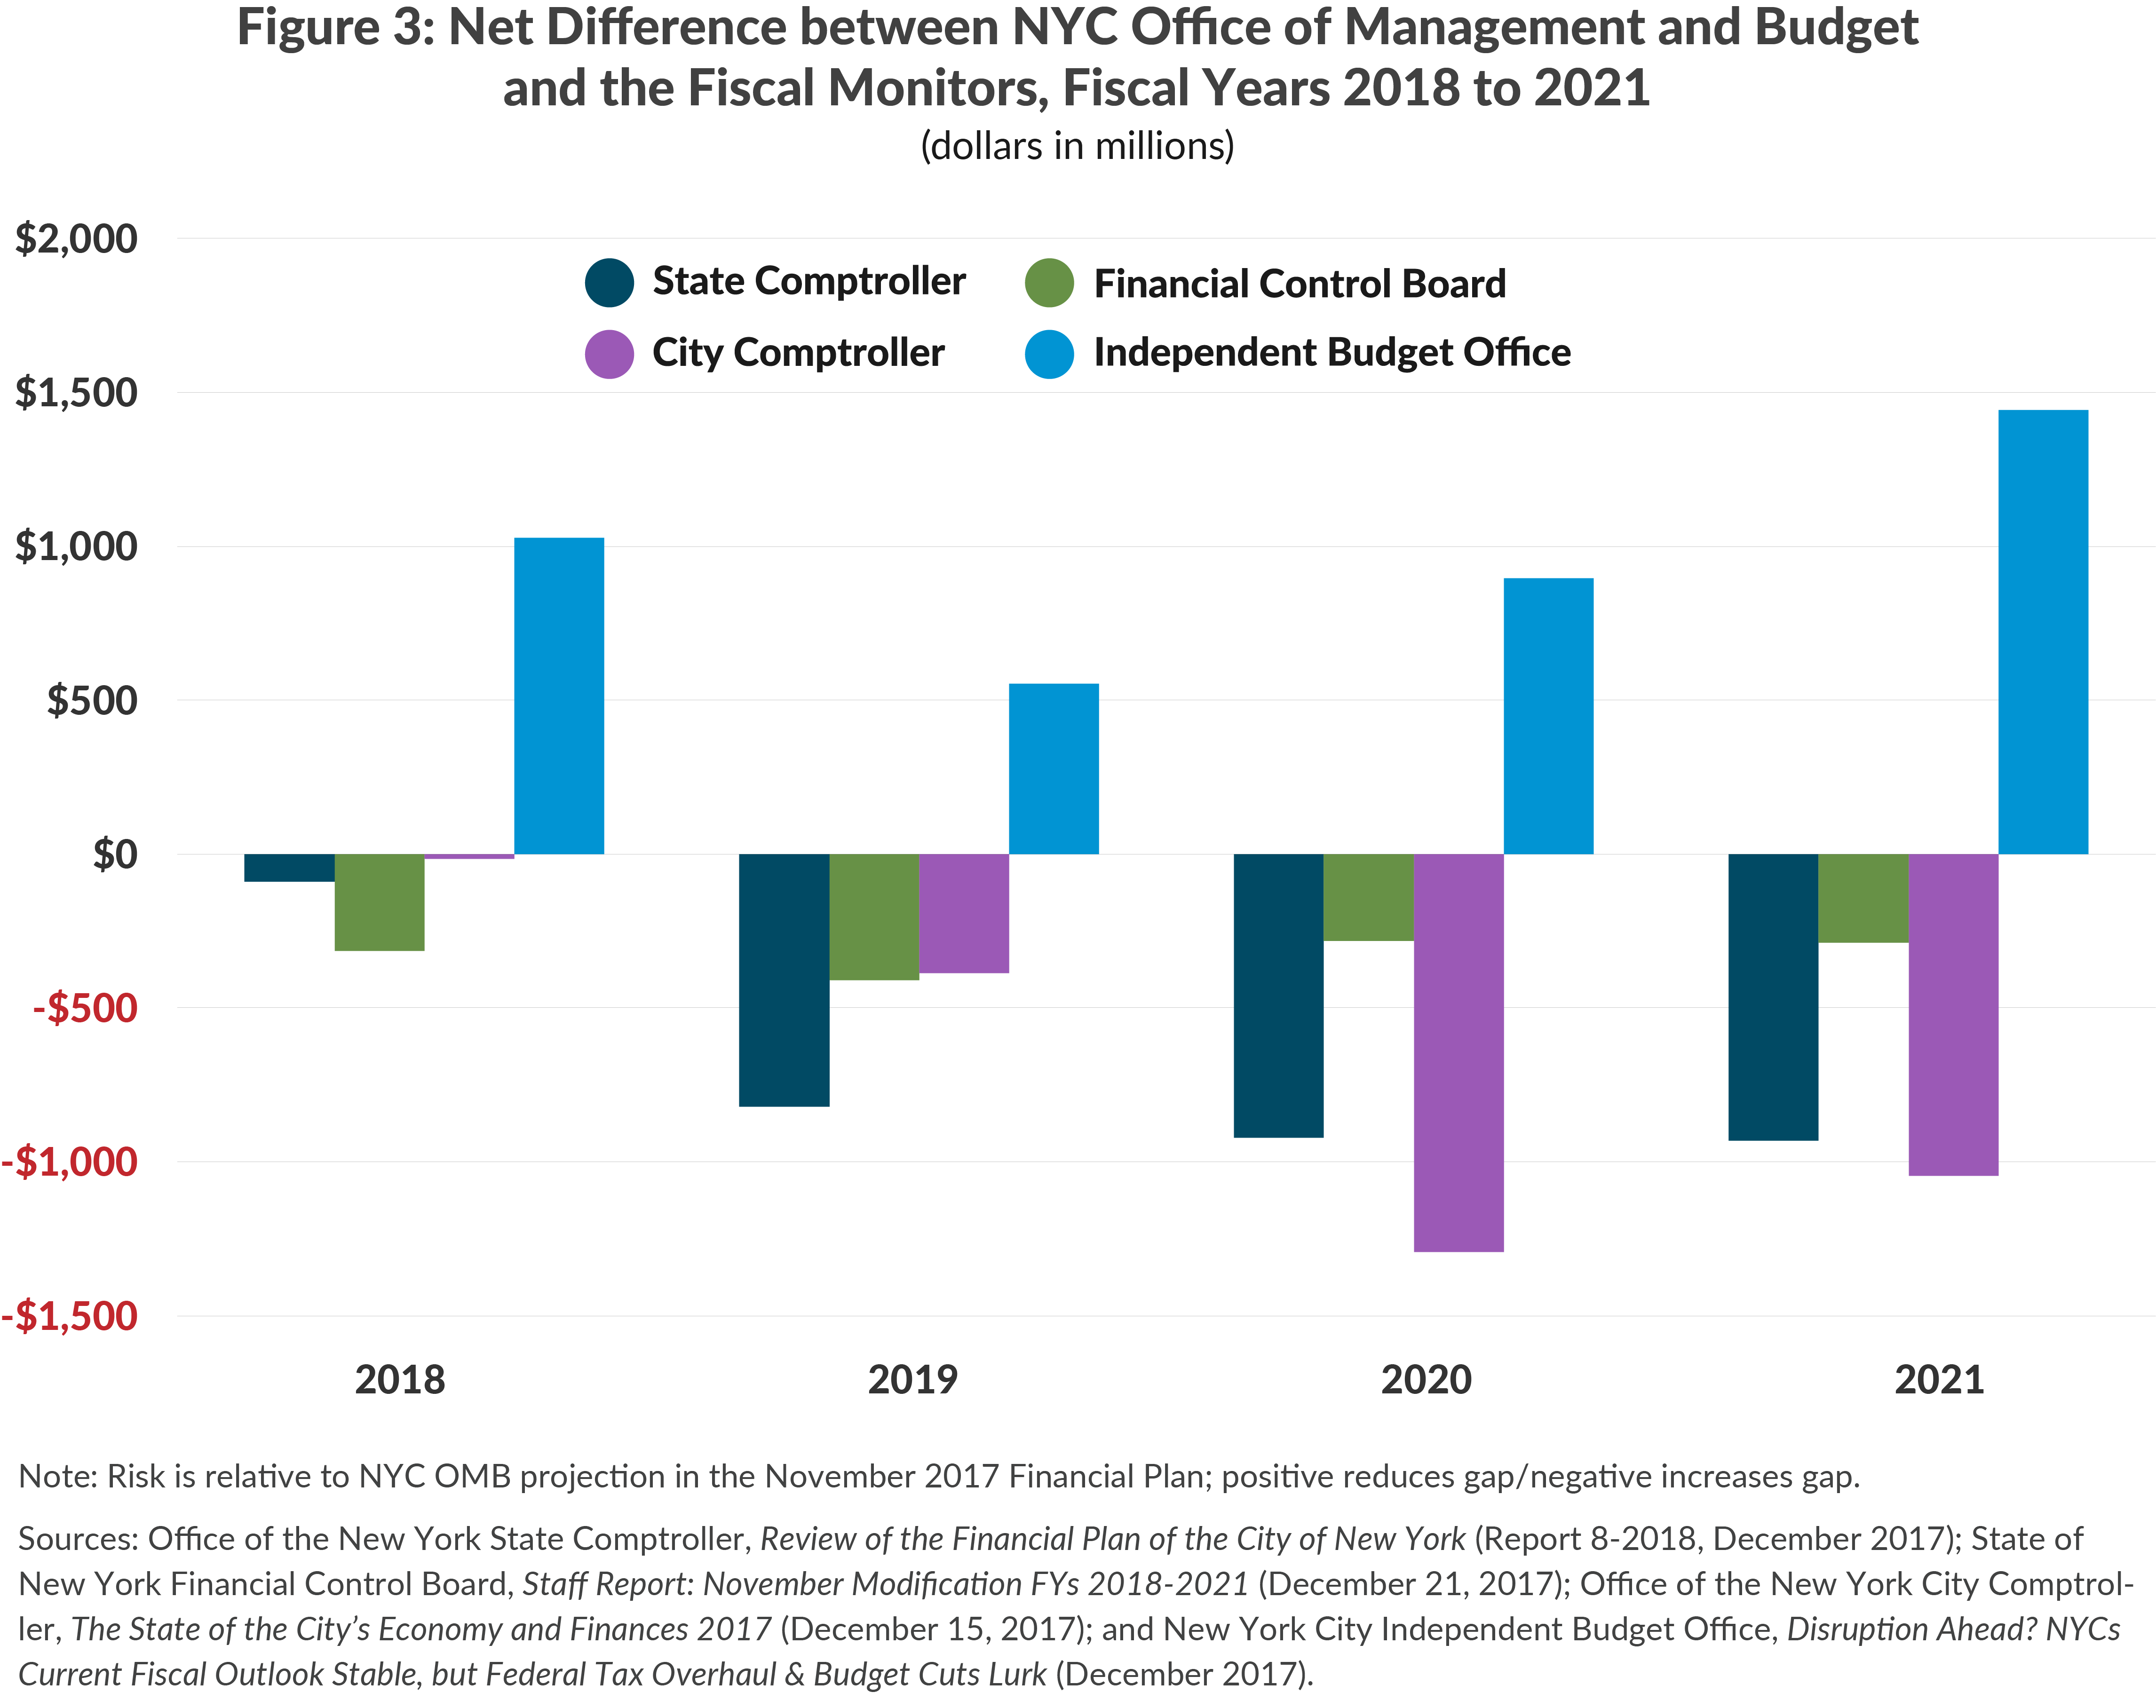 Figure 3: Net Difference between NYC Office of Management and Budgetand the Fiscal Monitors, Fiscal Years 2018 to 2021